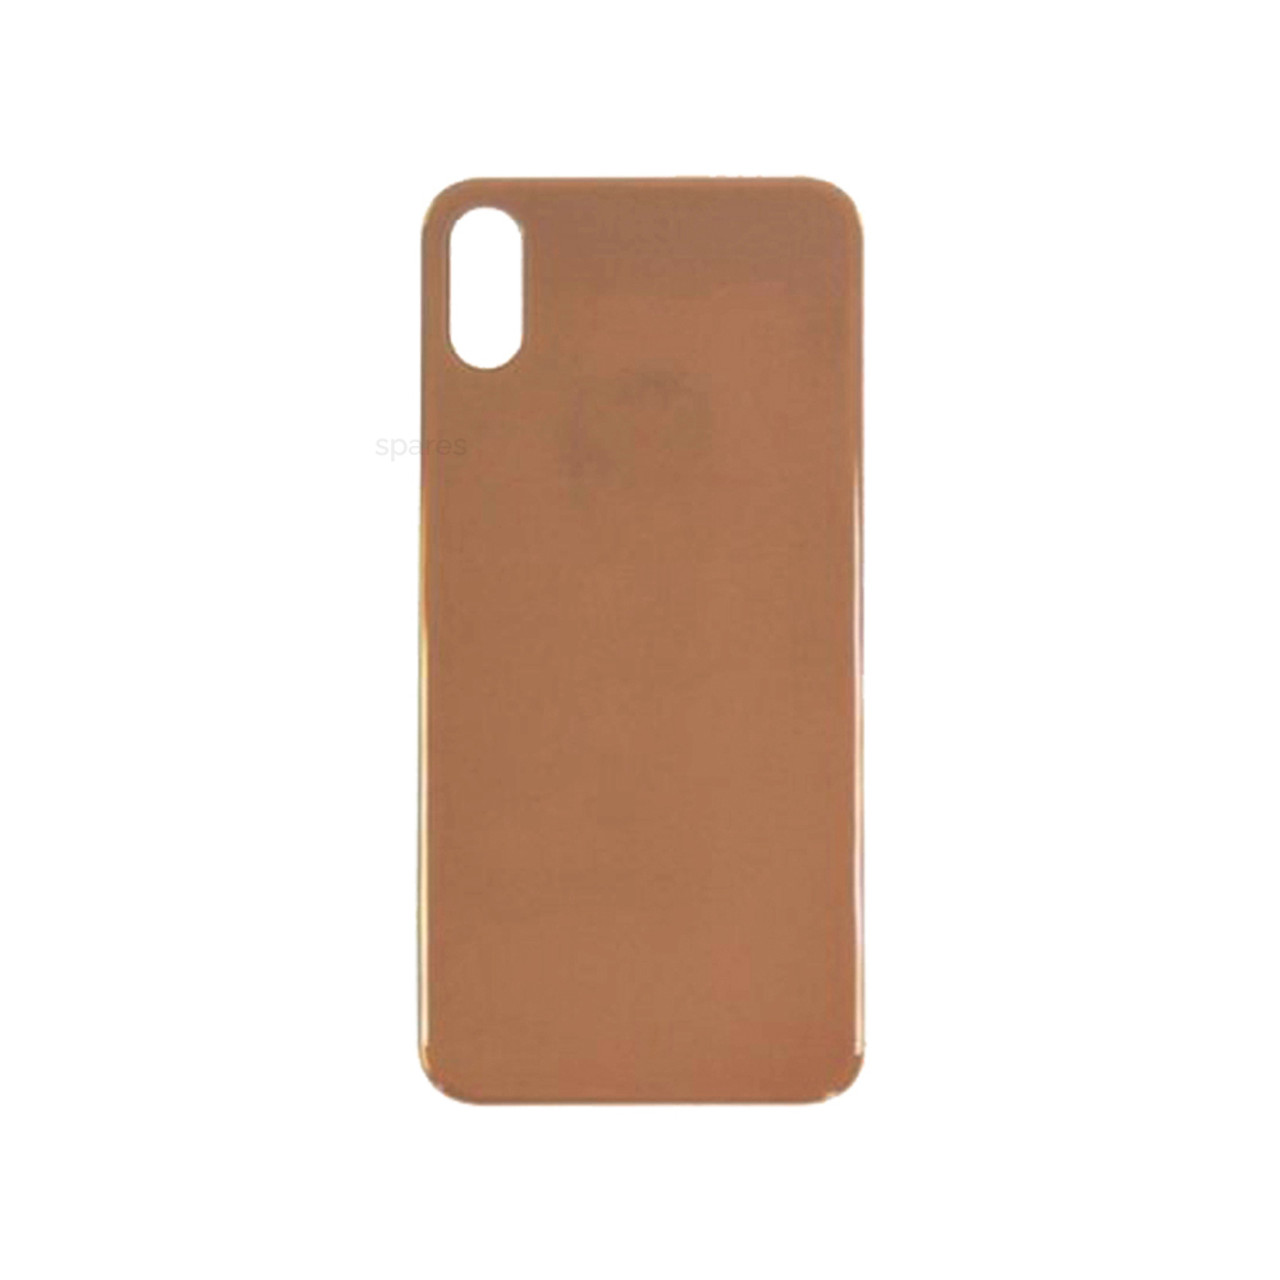 iPhone XS Rear Back Glass With Big Camera Hole Grey Replacement